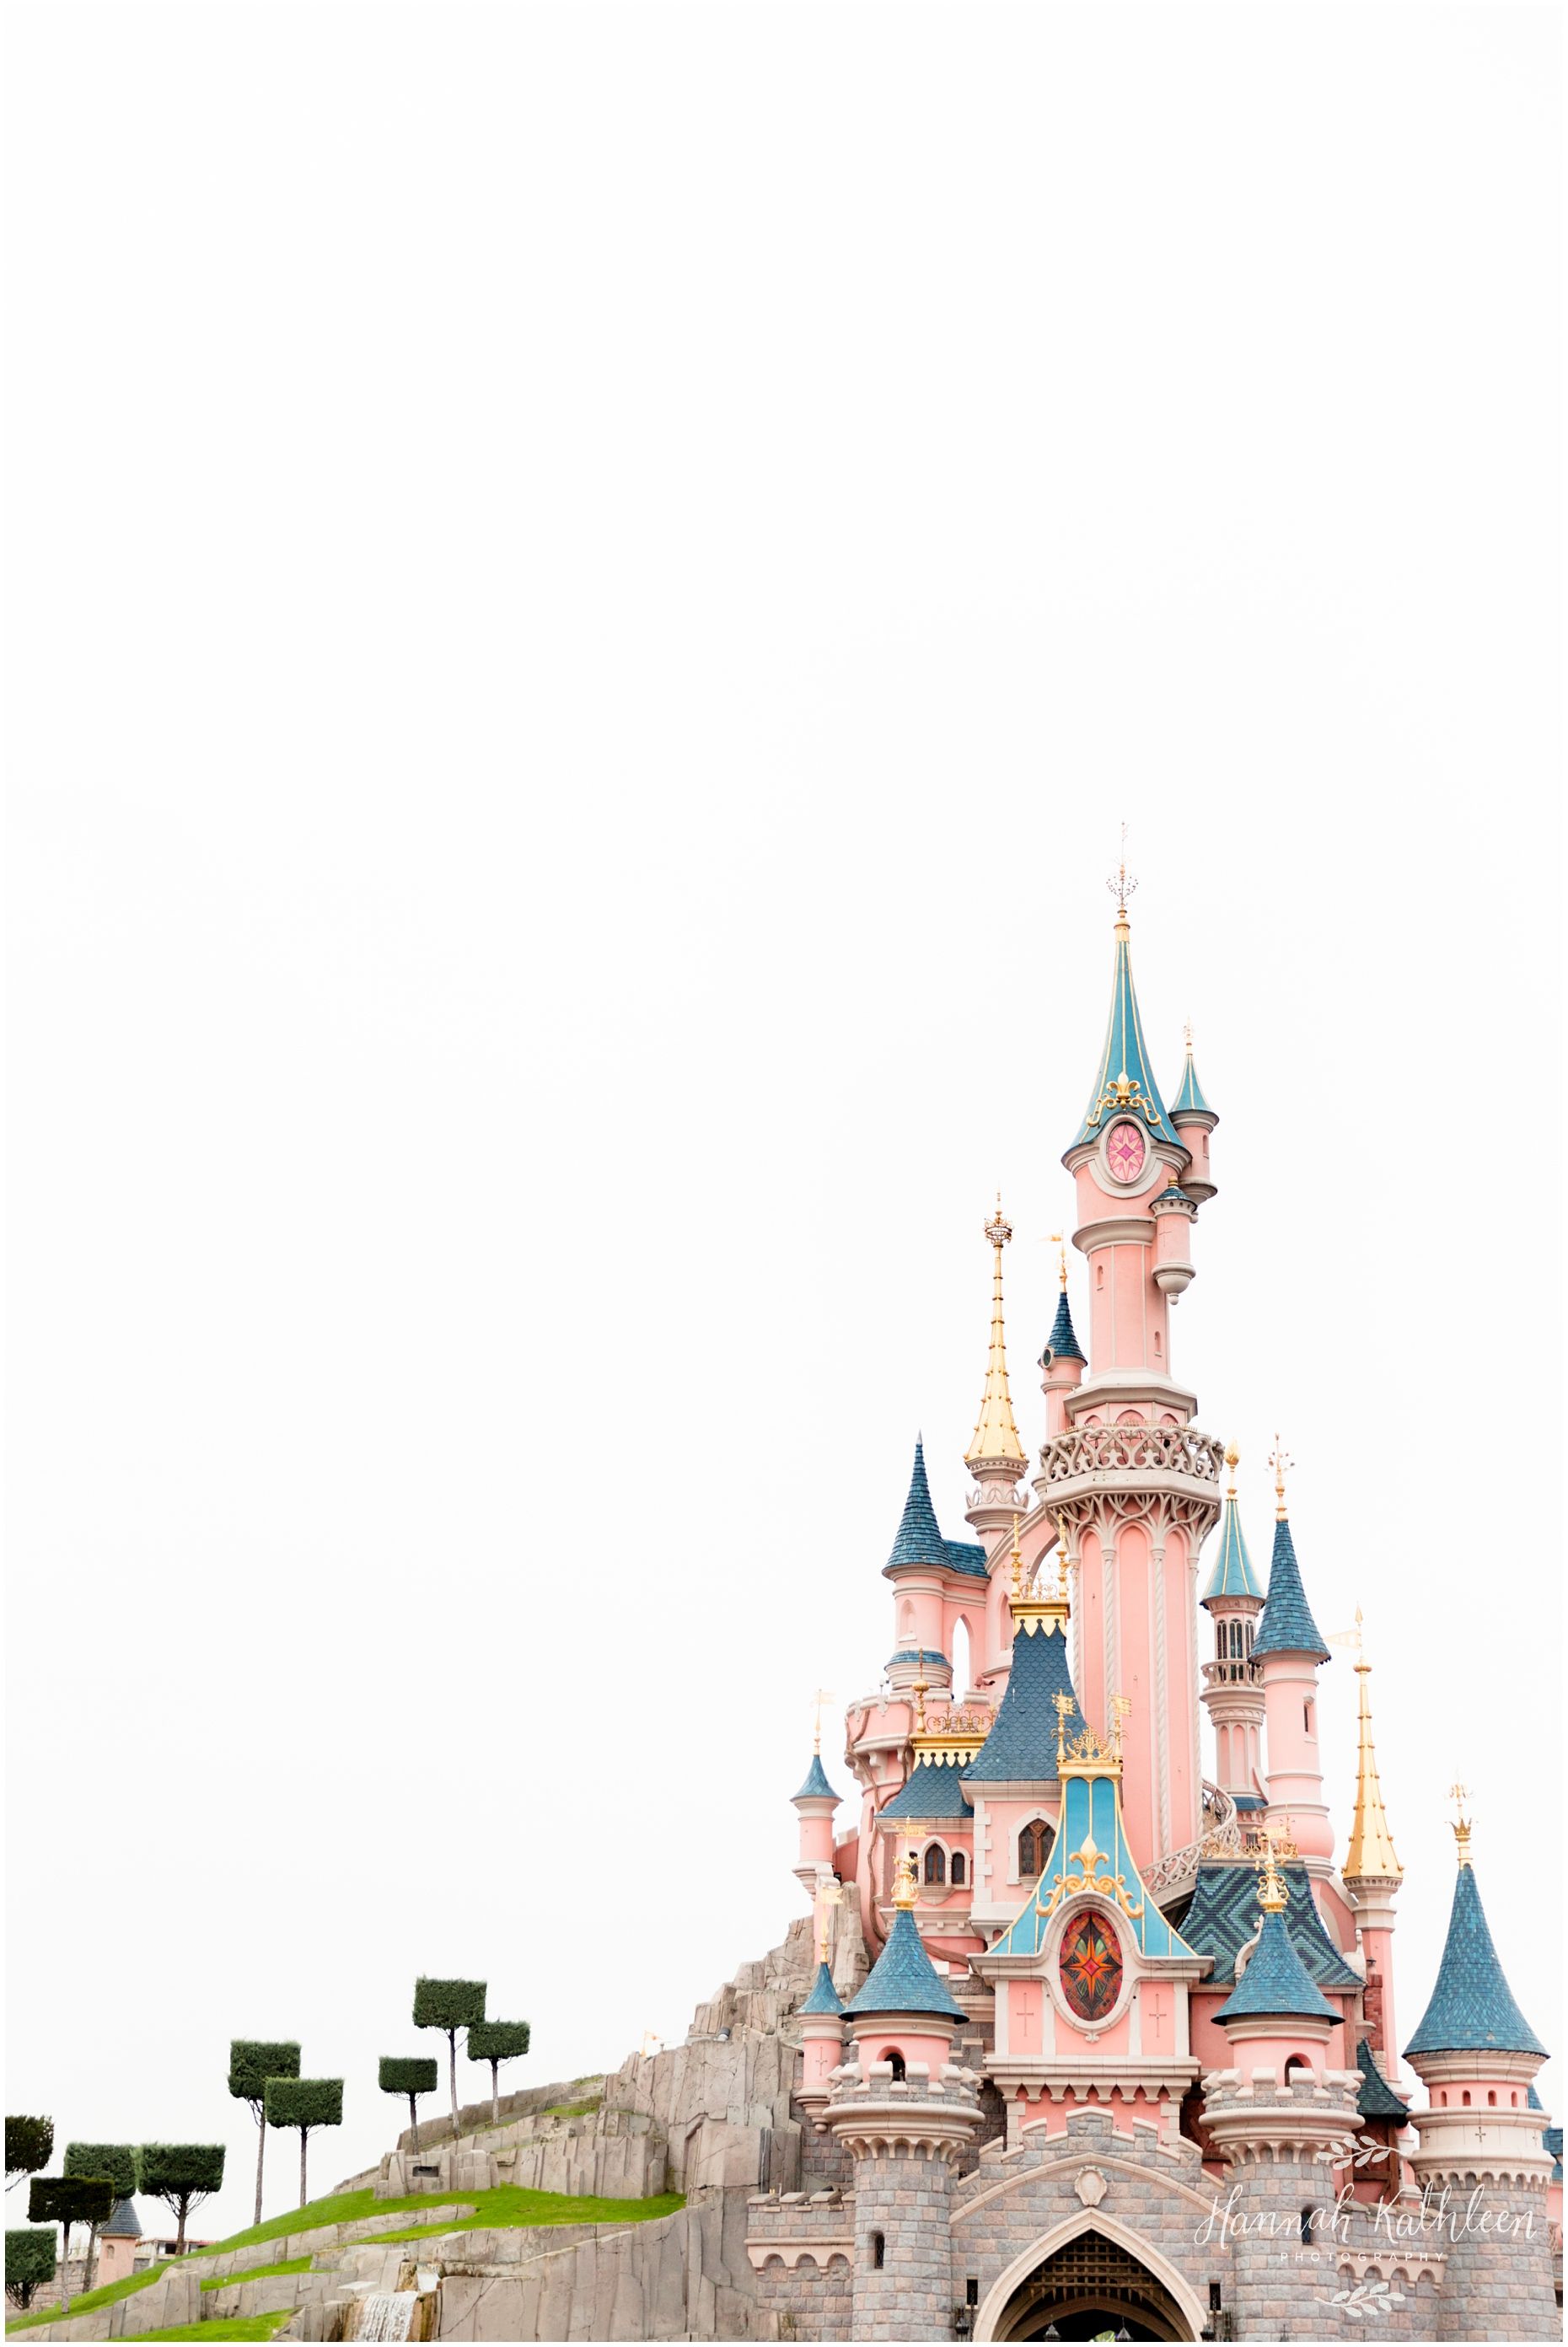 A castle with blue and pink towers - Disneyland